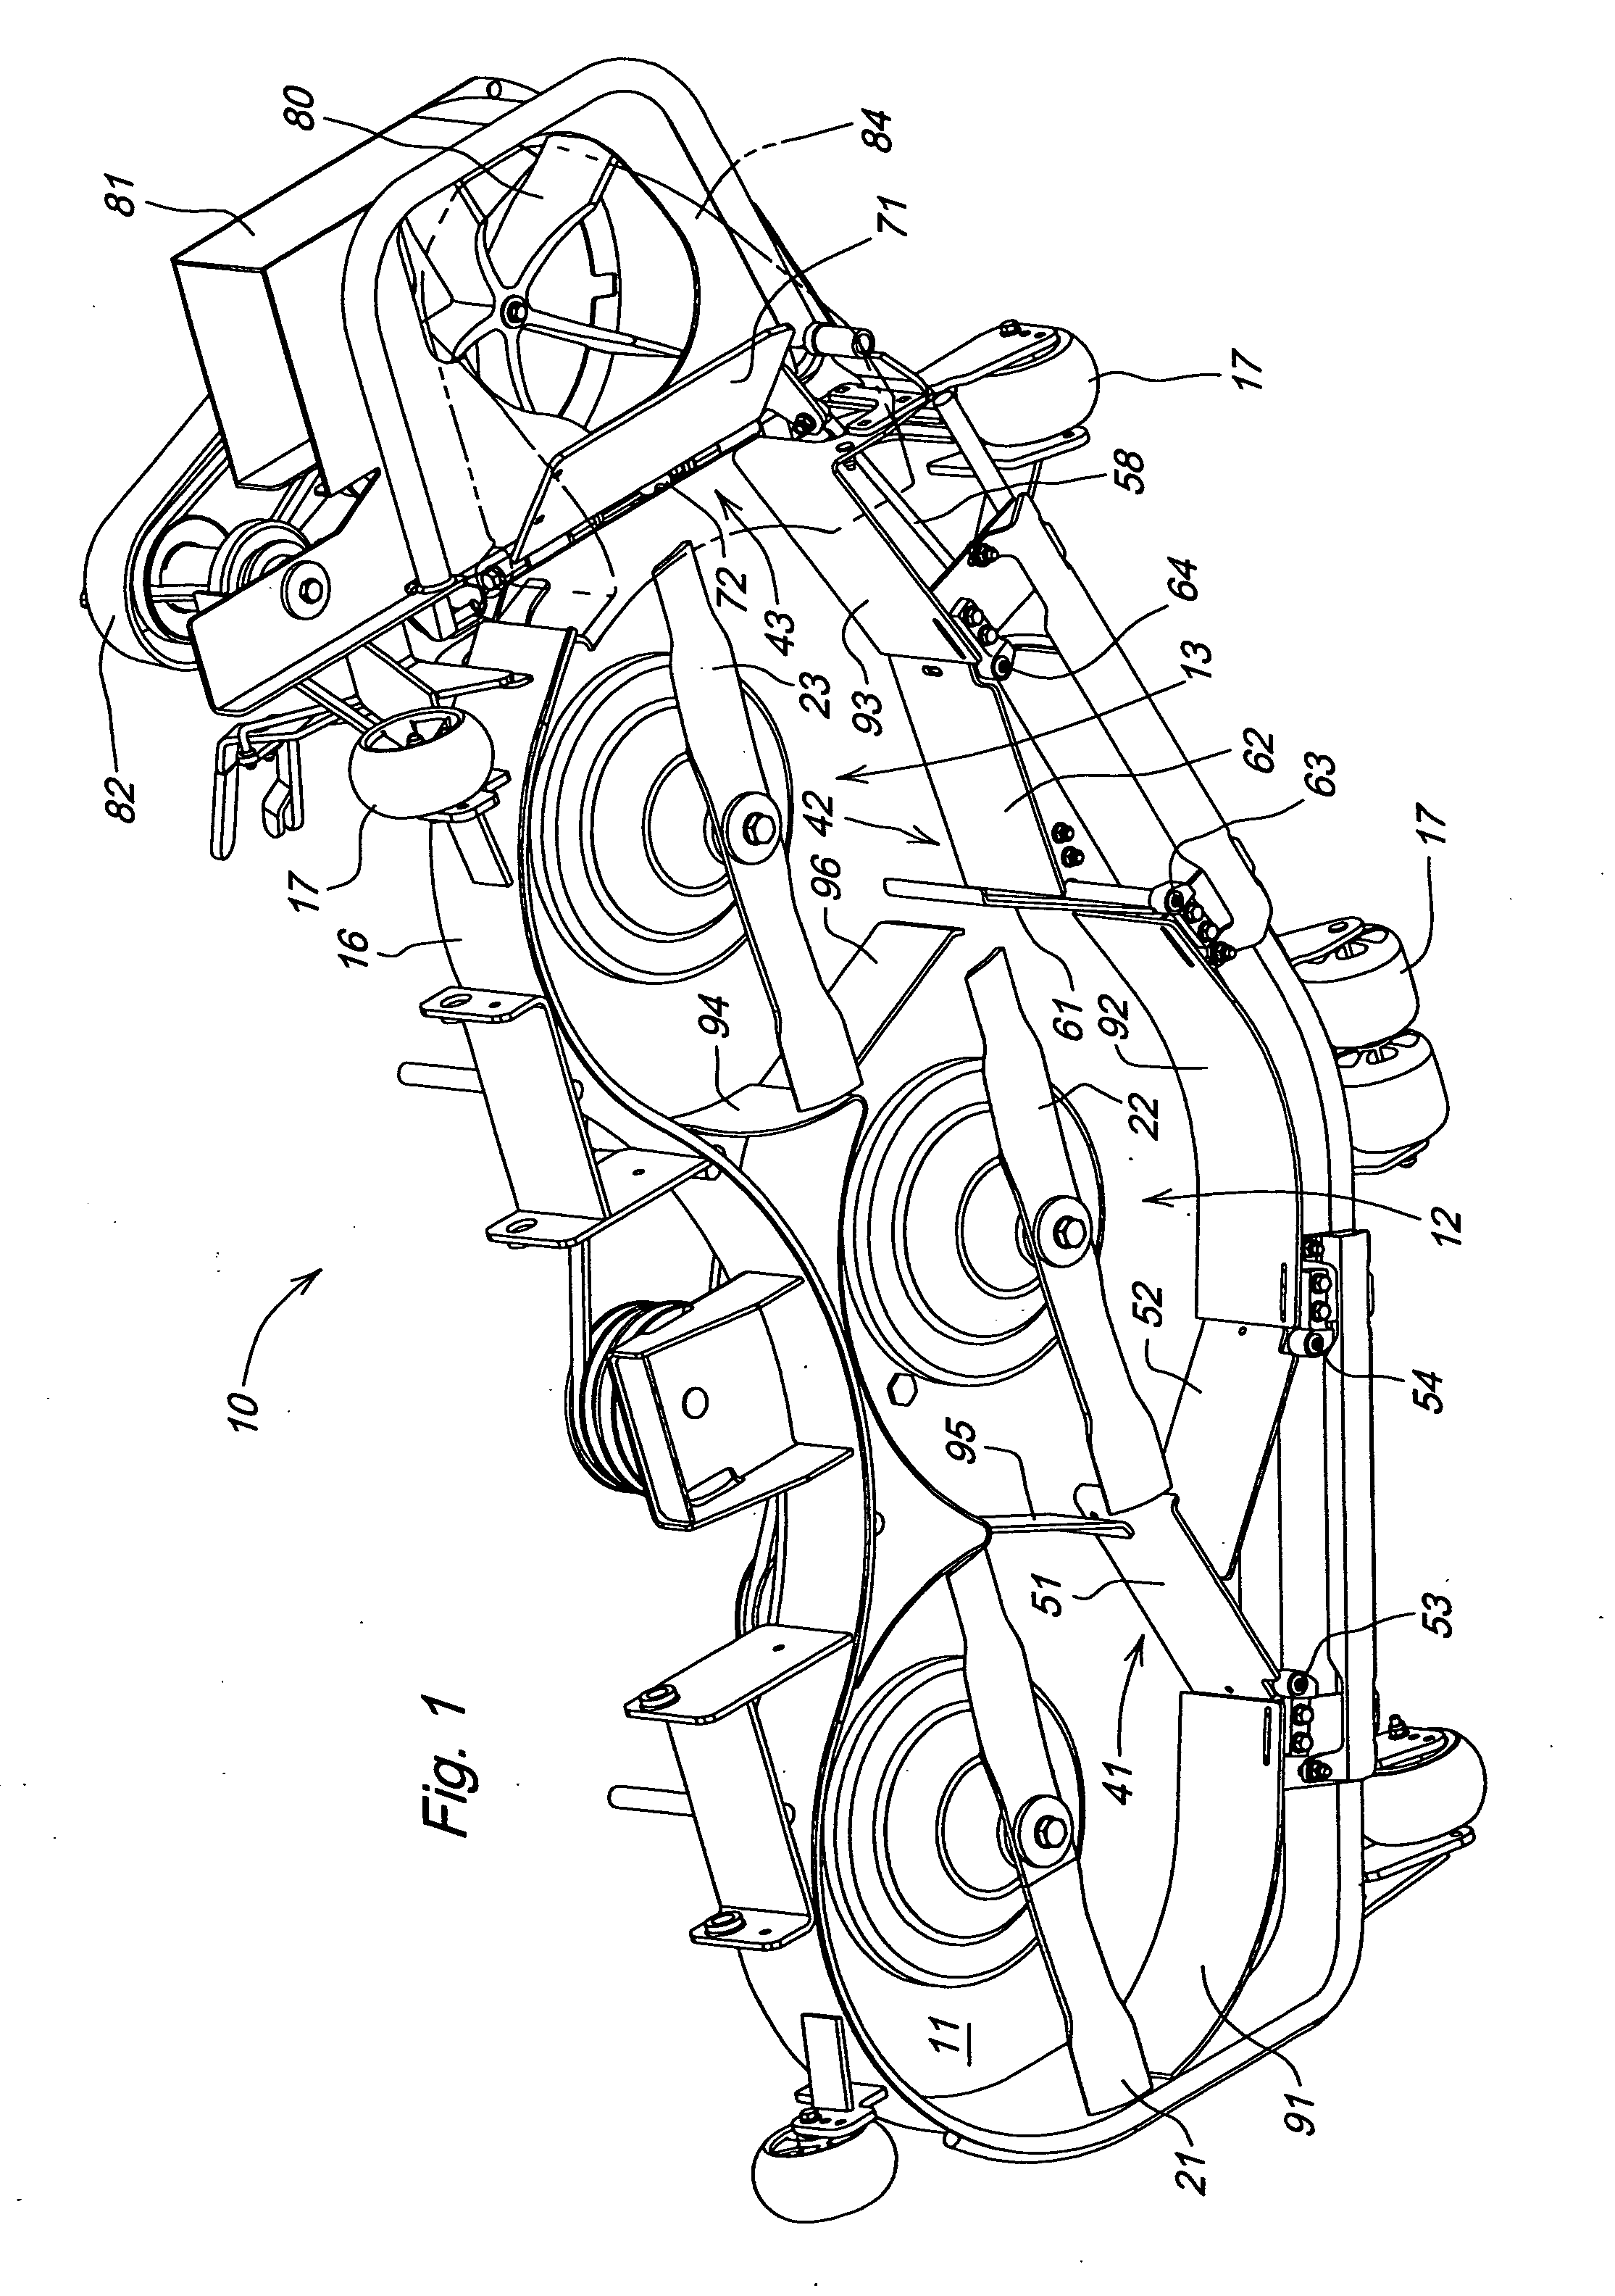 Mower deck with multiple modes of operation